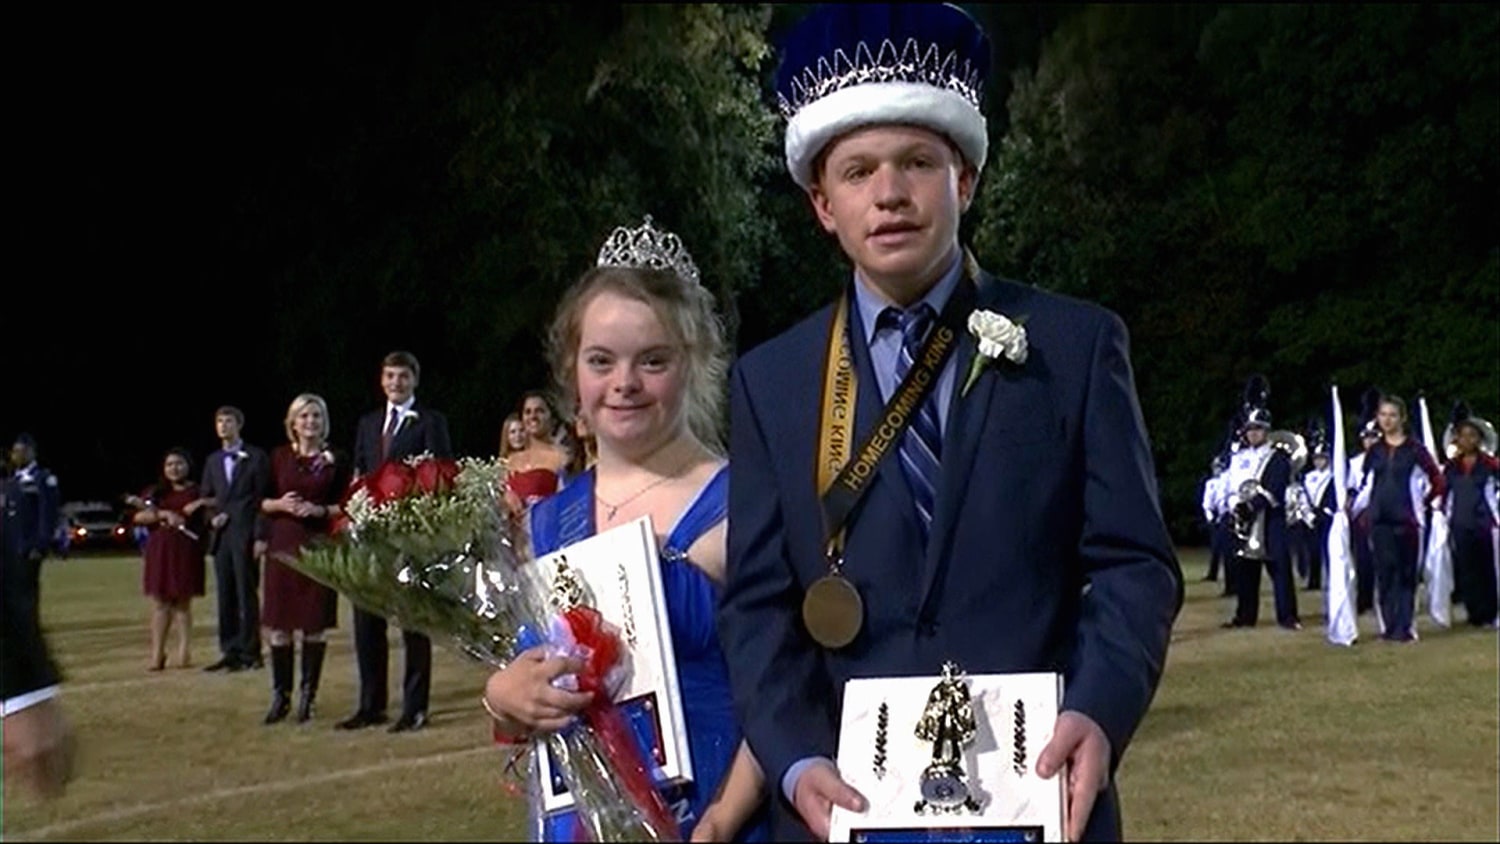 High school picks a boy as its homecoming queen for the first time - Scoop  Upworthy